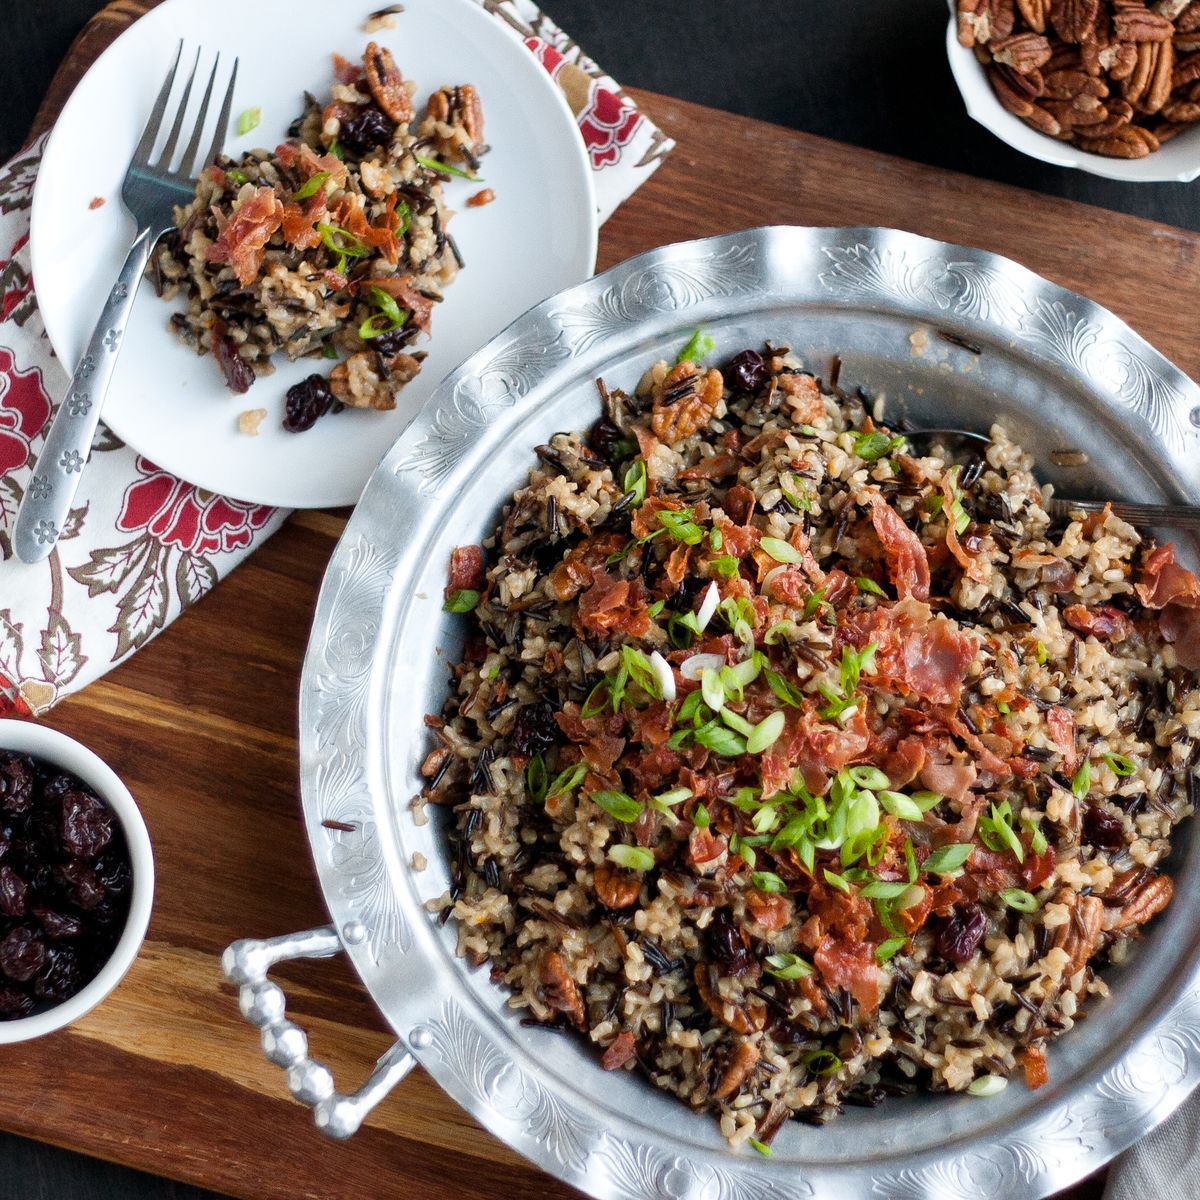 Gluten-Free Wild Rice Stuffing with Prosciutto, Cherries, and Spiced Pecans